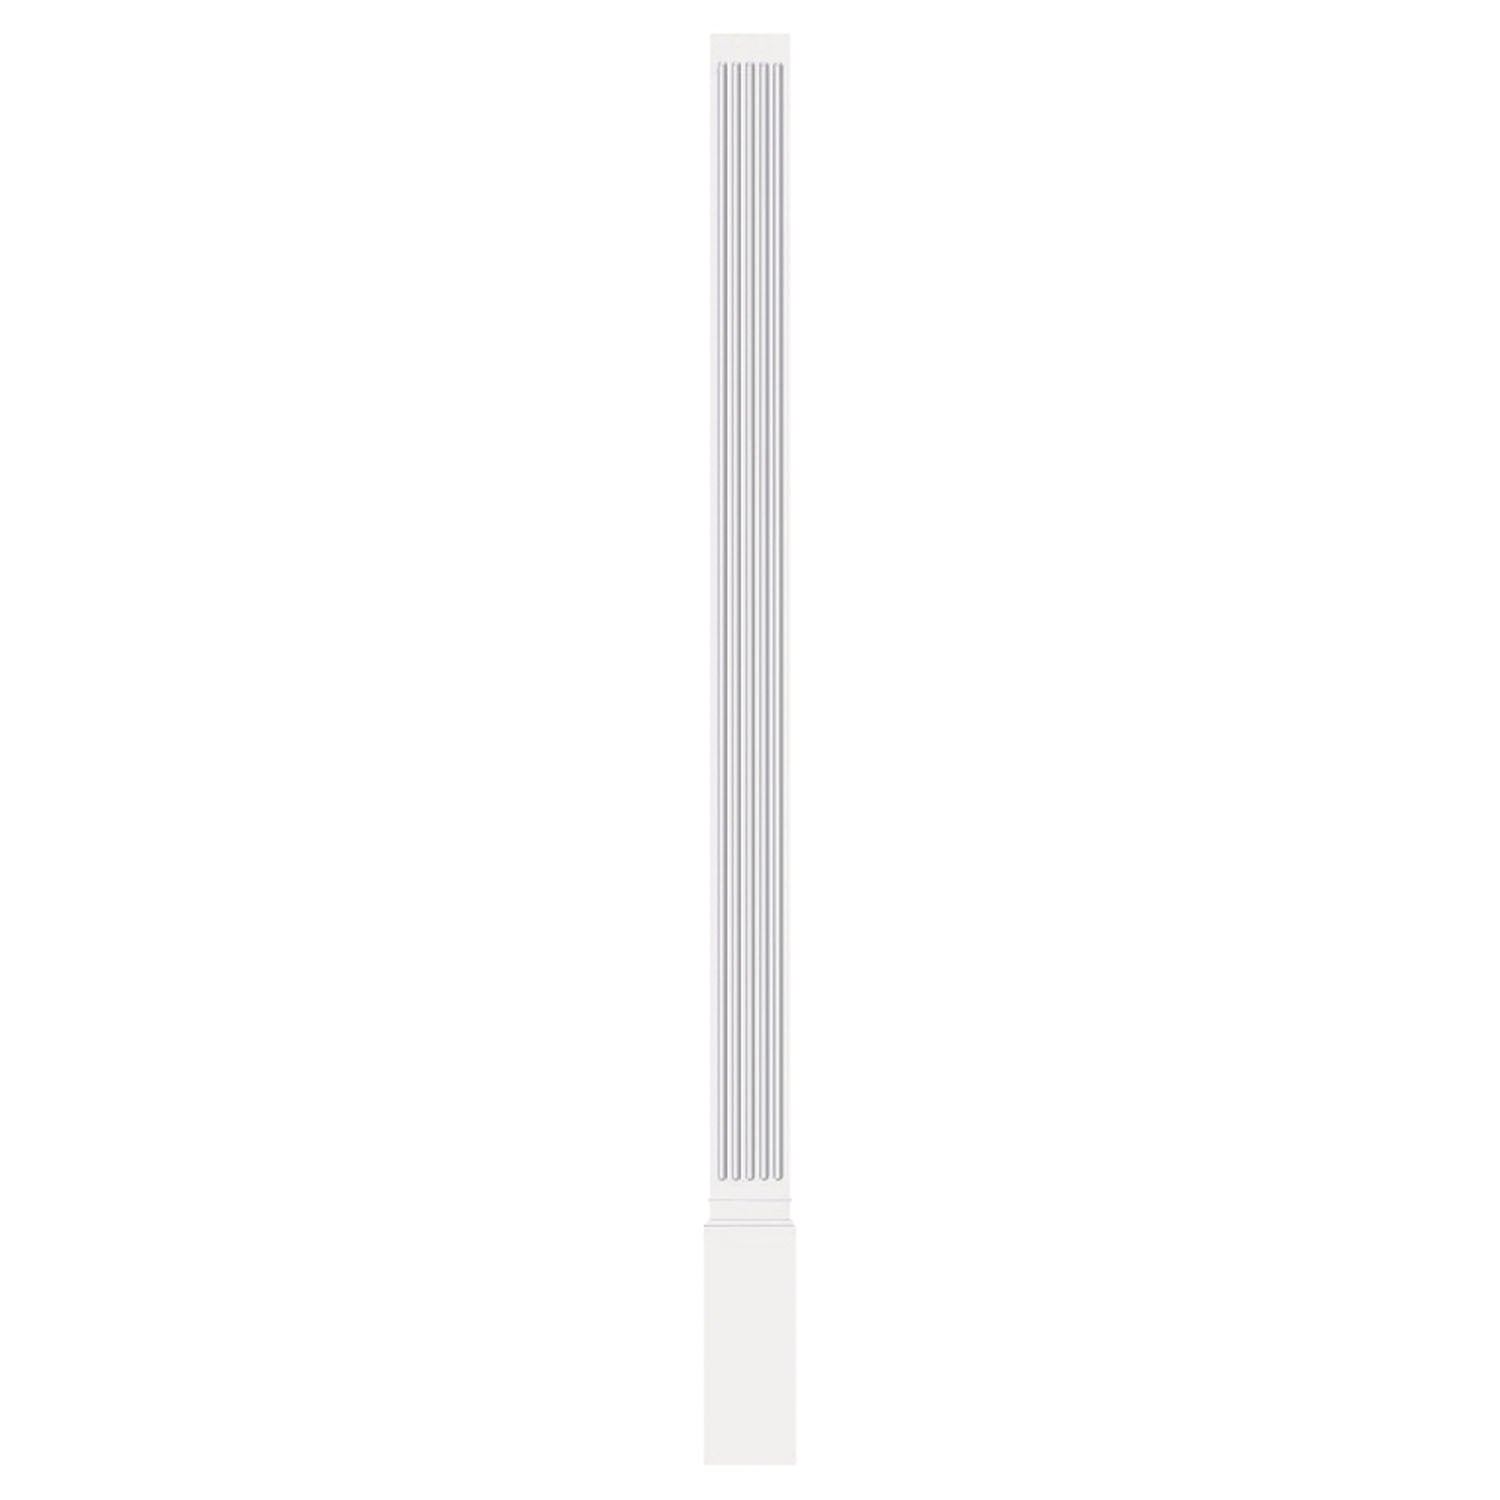 Focal Point Lighting 97405 Pilasters Fluted Pilaster Decor White